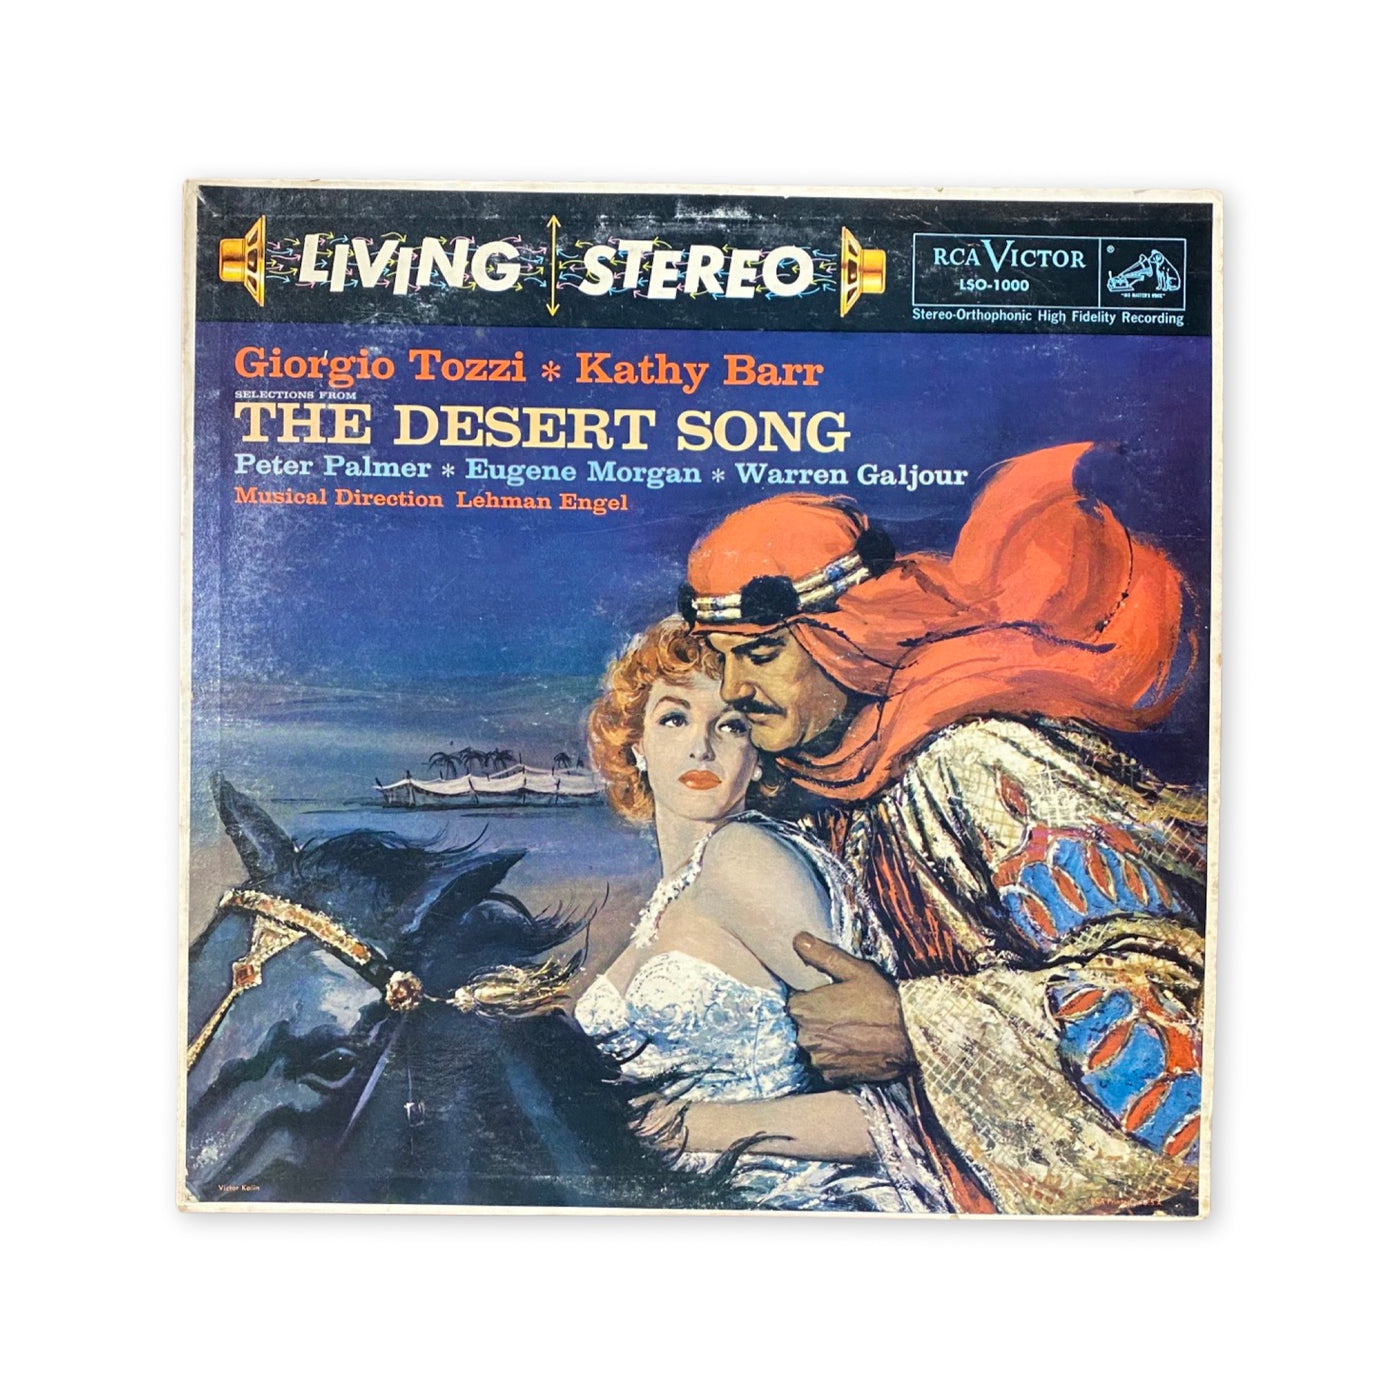 Giorgio Tozzi / Kathy Barr With Peter Palmer (2), Eugene Morgan And Warren Galjour - Selections From The Desert Song